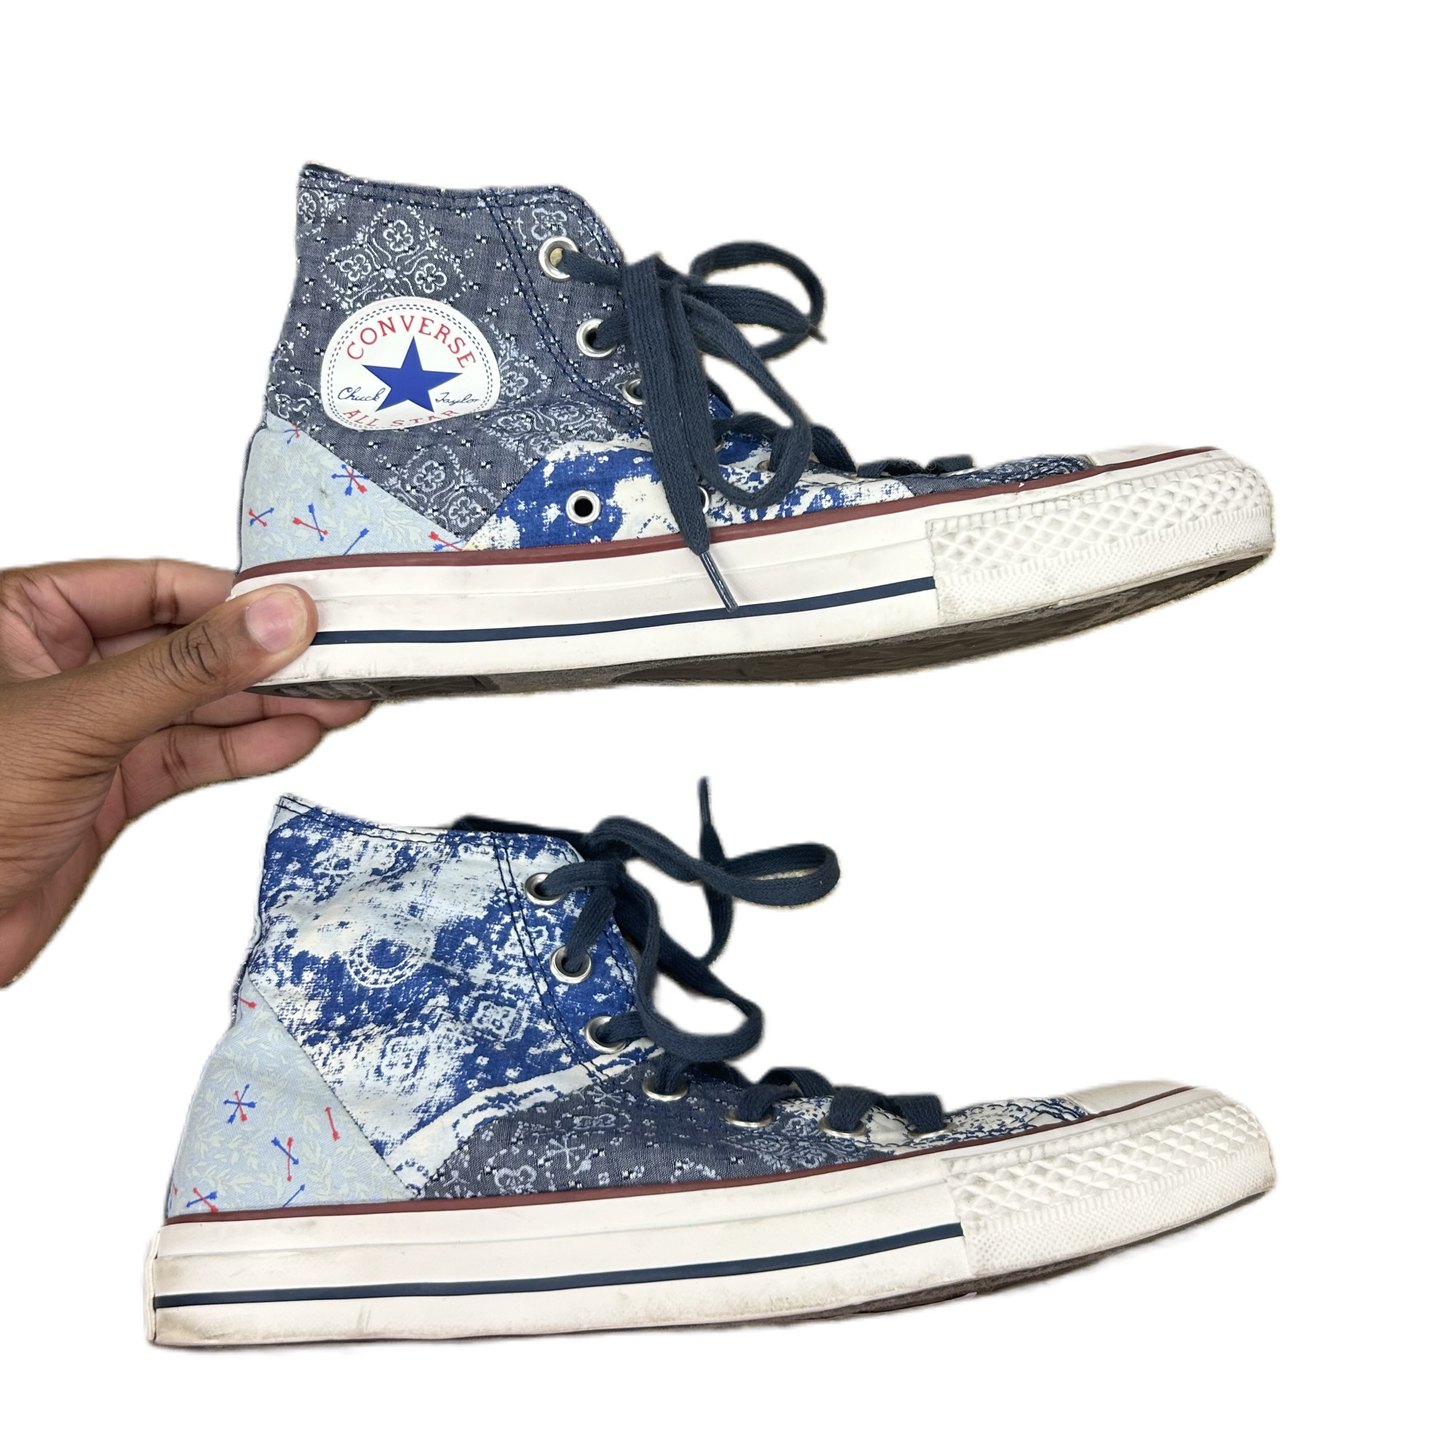 Blue Denim Shoes Sneakers By Converse, Size: 8